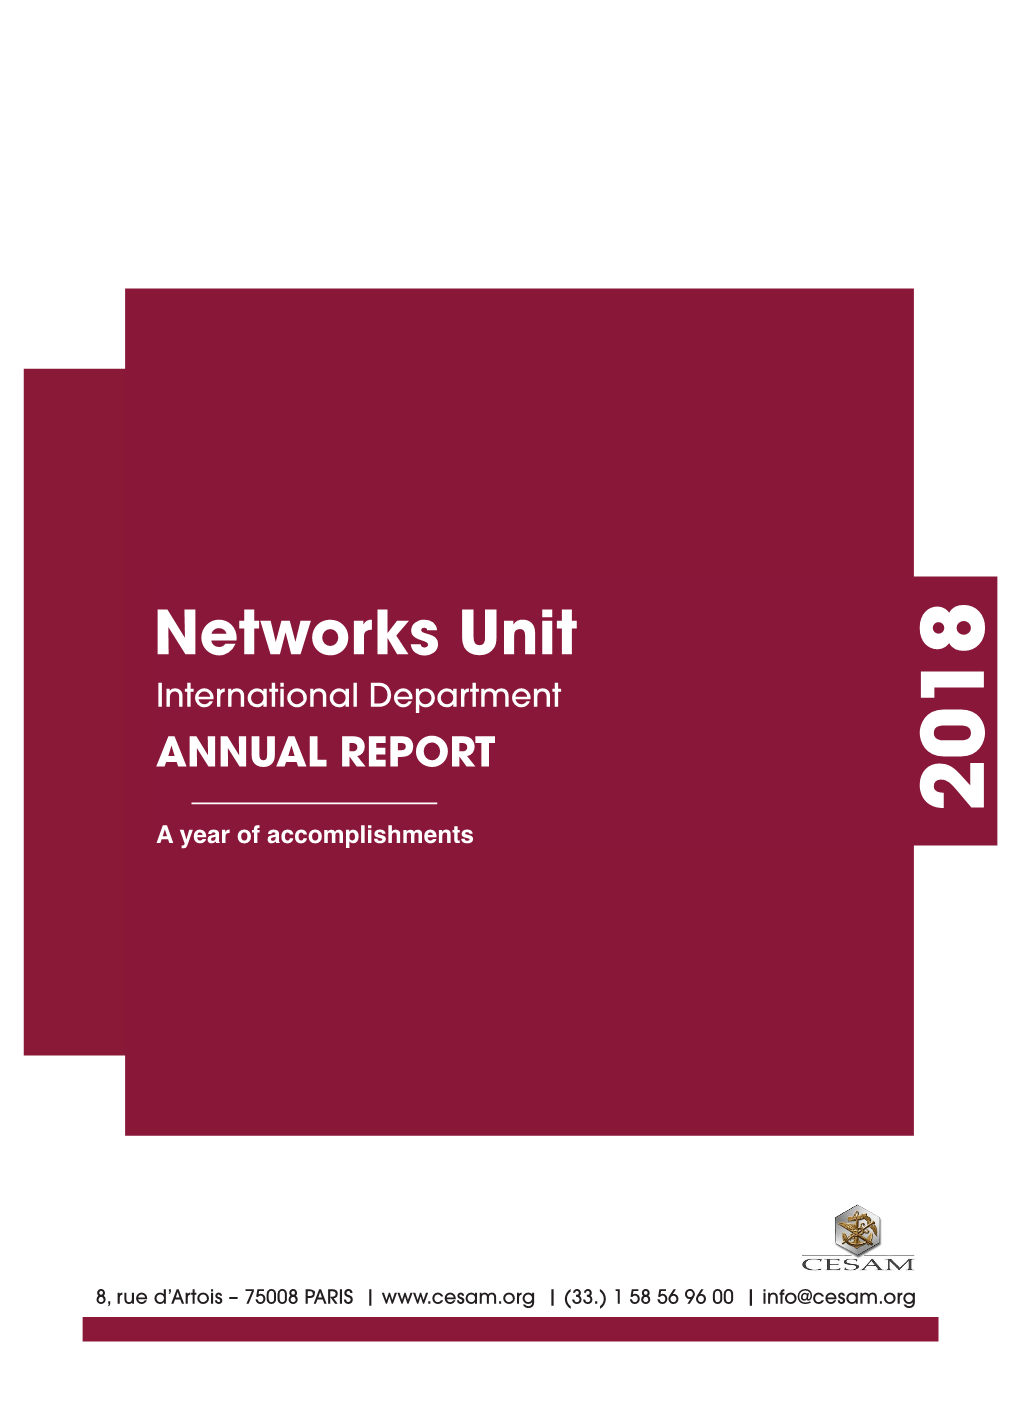 Networks Unit International Department ANNUAL REPORT 2018 a Year of Accomplishments